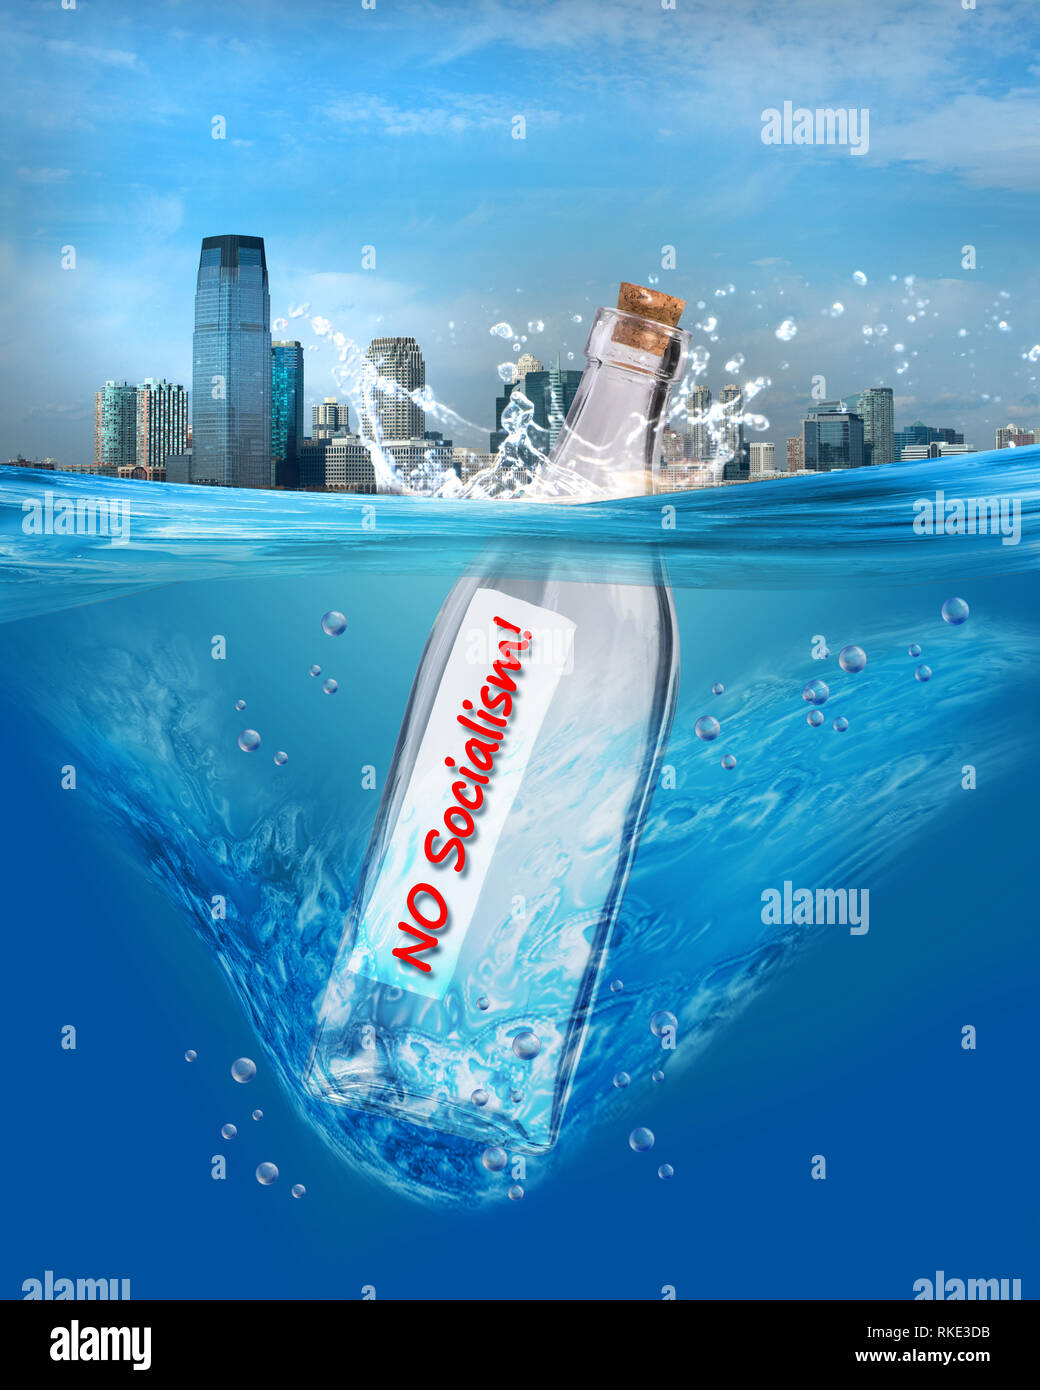 No Socialism in a bottle floating in the water. Stock Photo